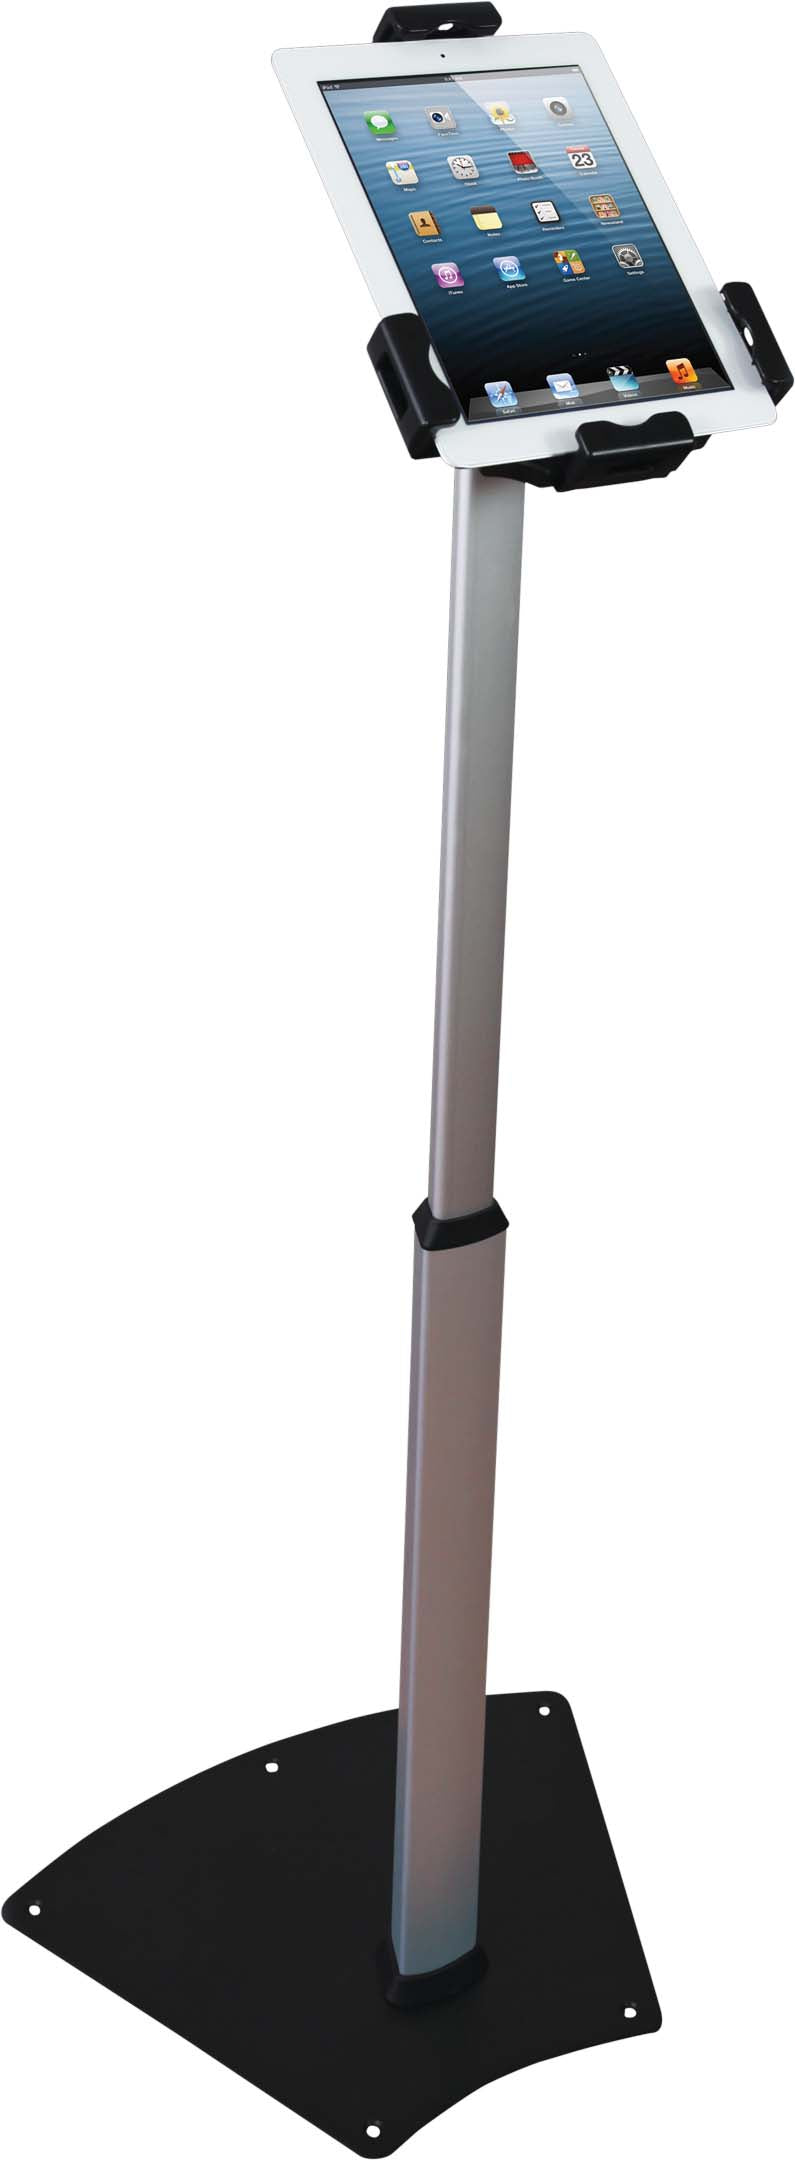 steel stand holding an iPad tablet